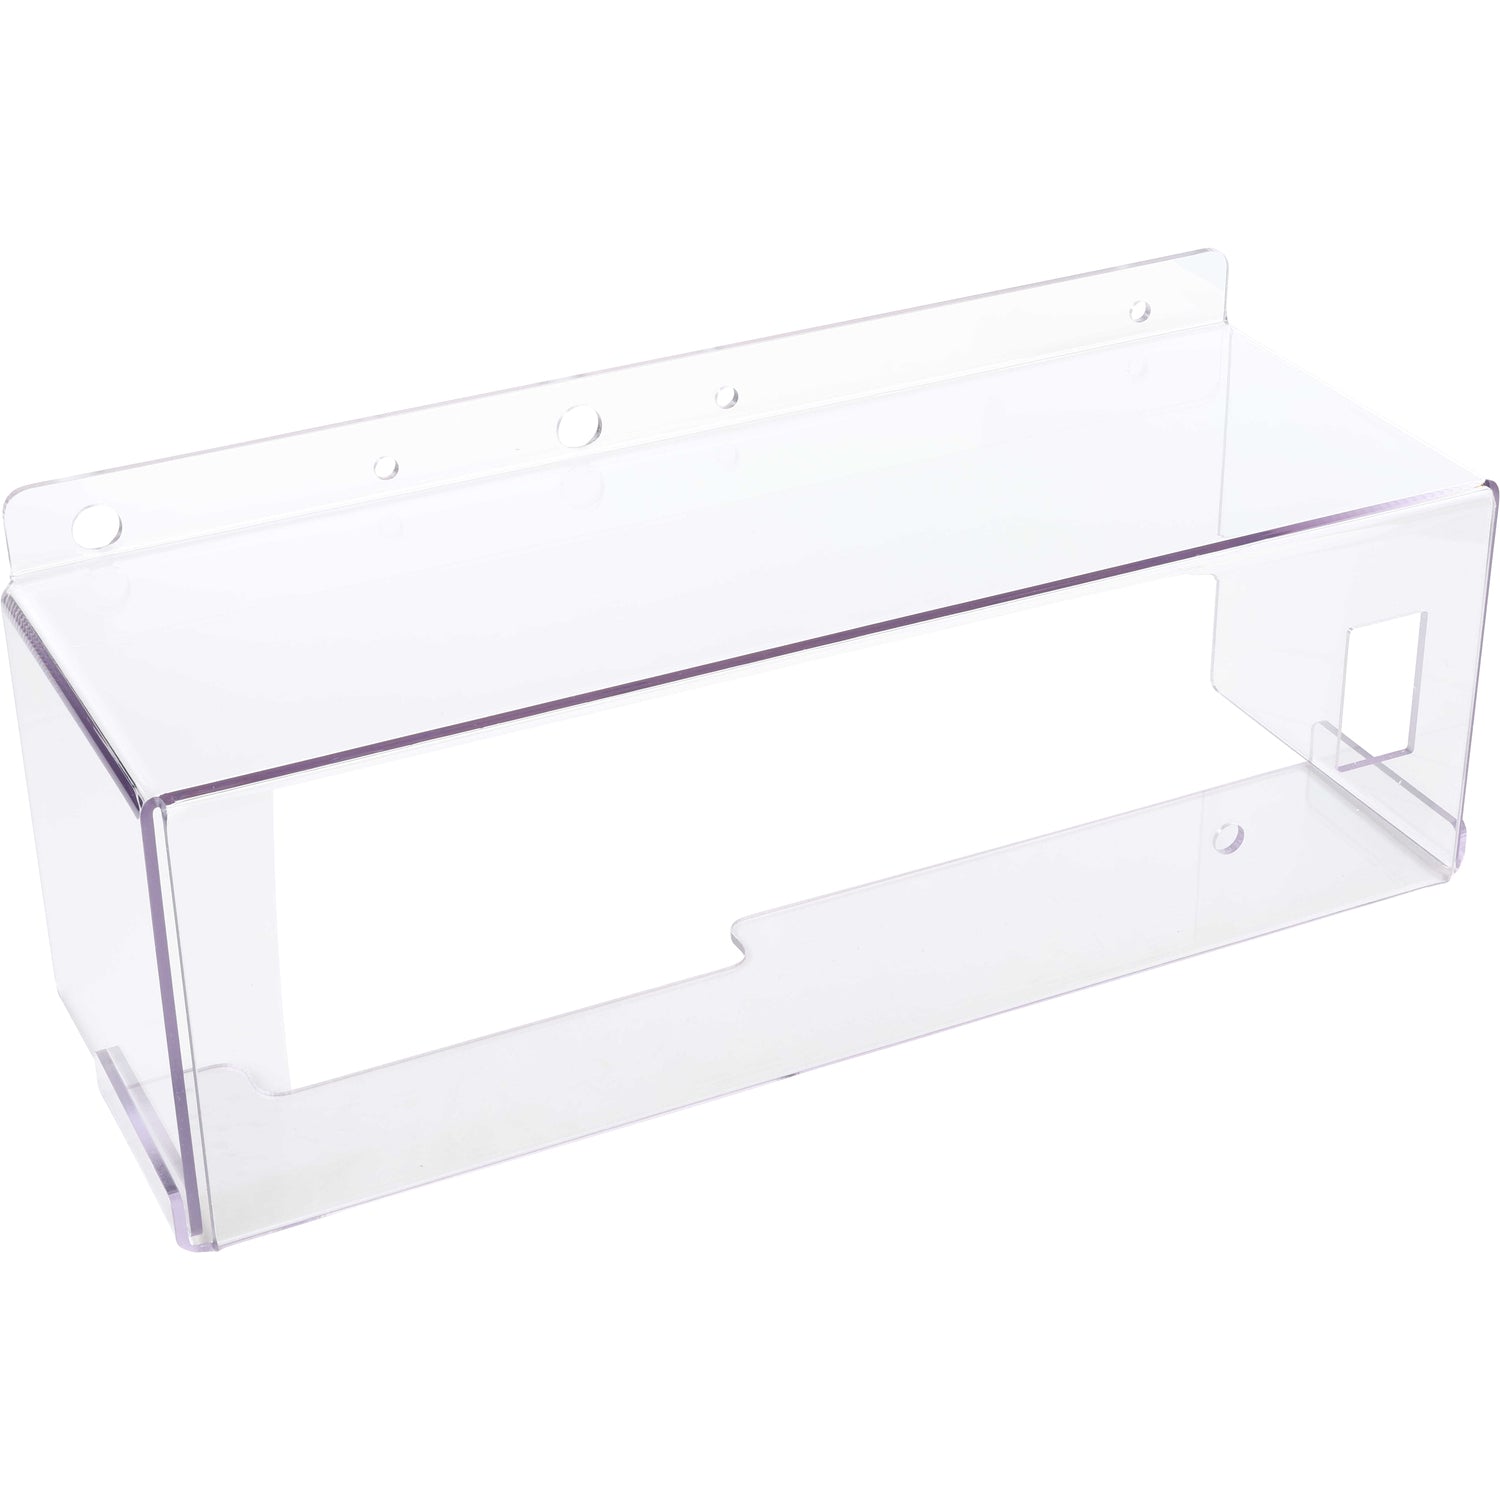 Rectangular, bent, clear, impact resistant polycarbonate guarding with multiple holes cut into it. Guard is shown on white background. 